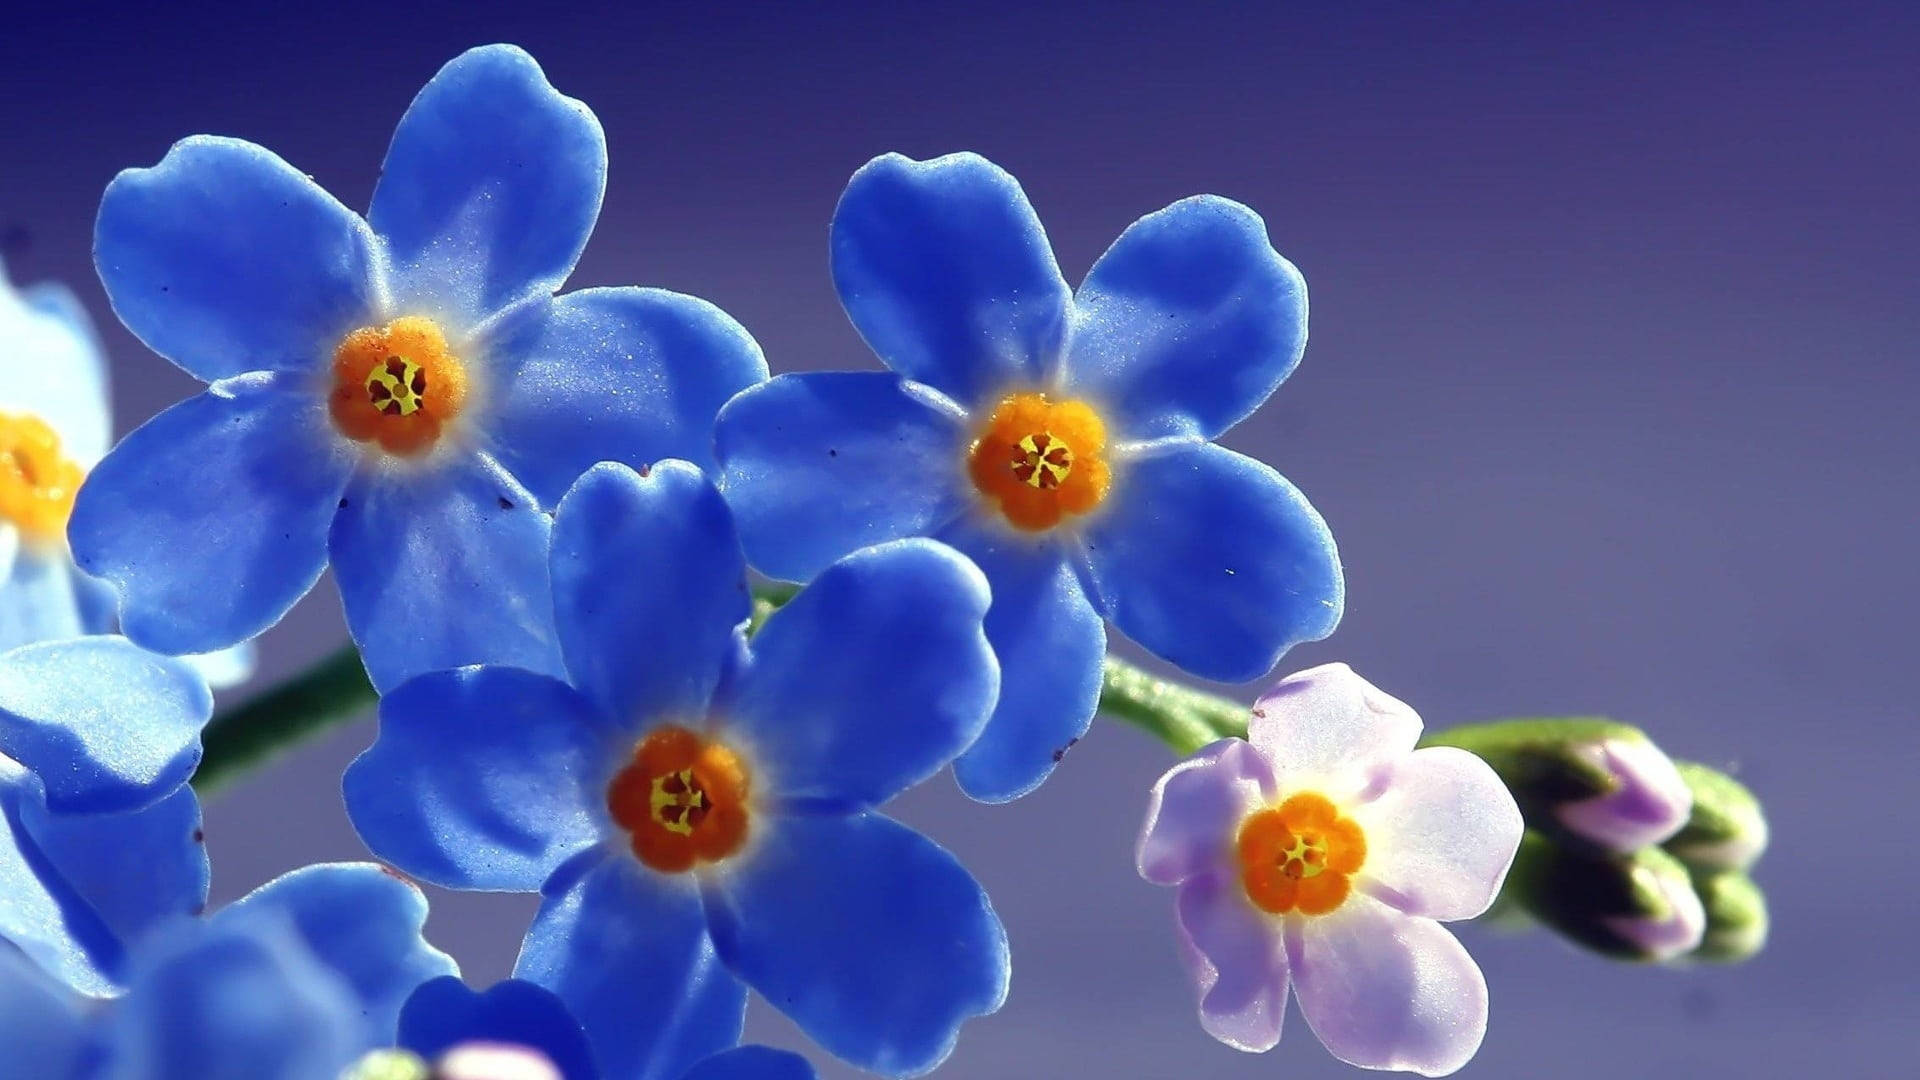 Beautiful Flower Forget Me Not Close-up Wallpaper